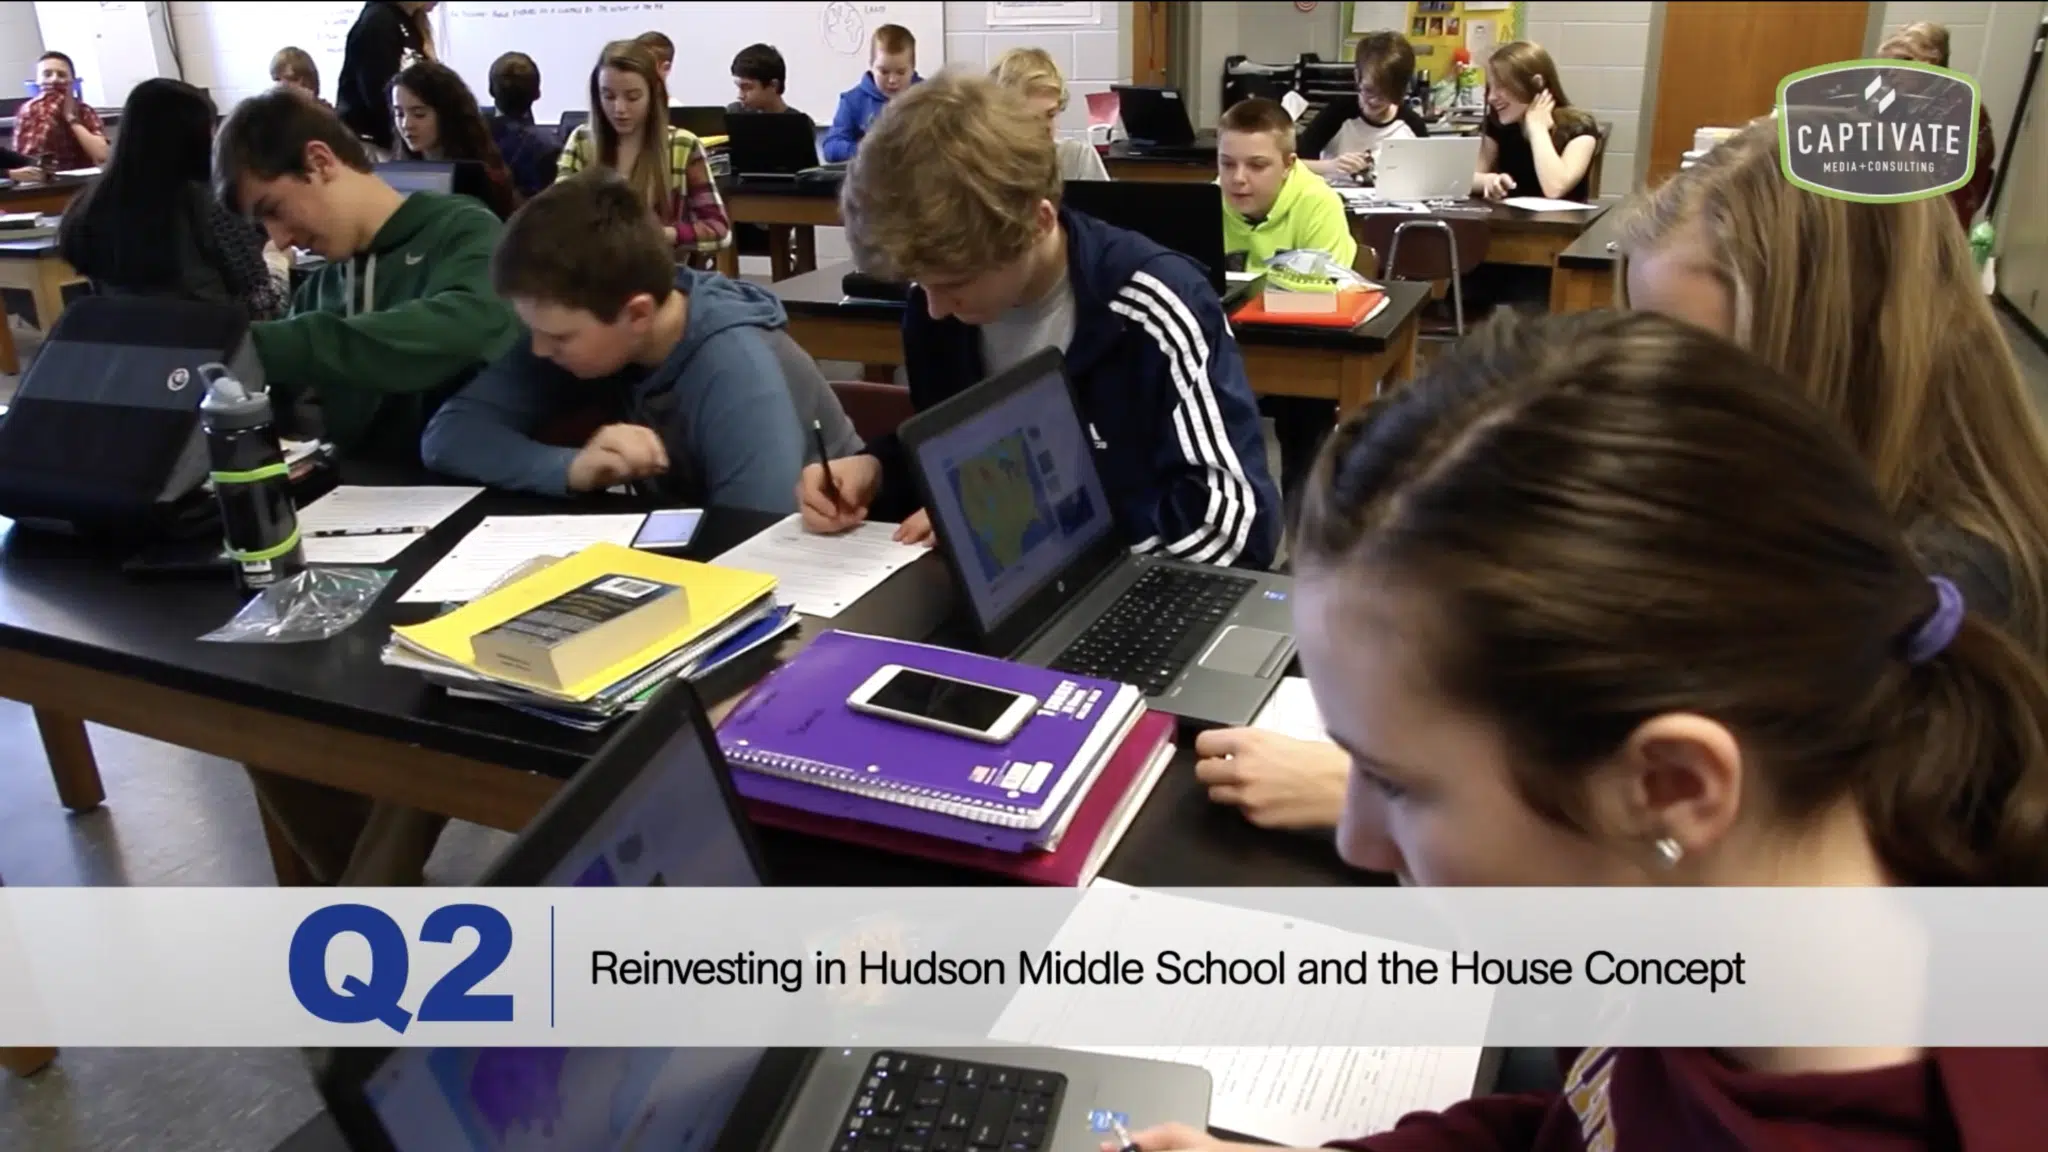 A screenshot from the video. A classroom of students working at tables.